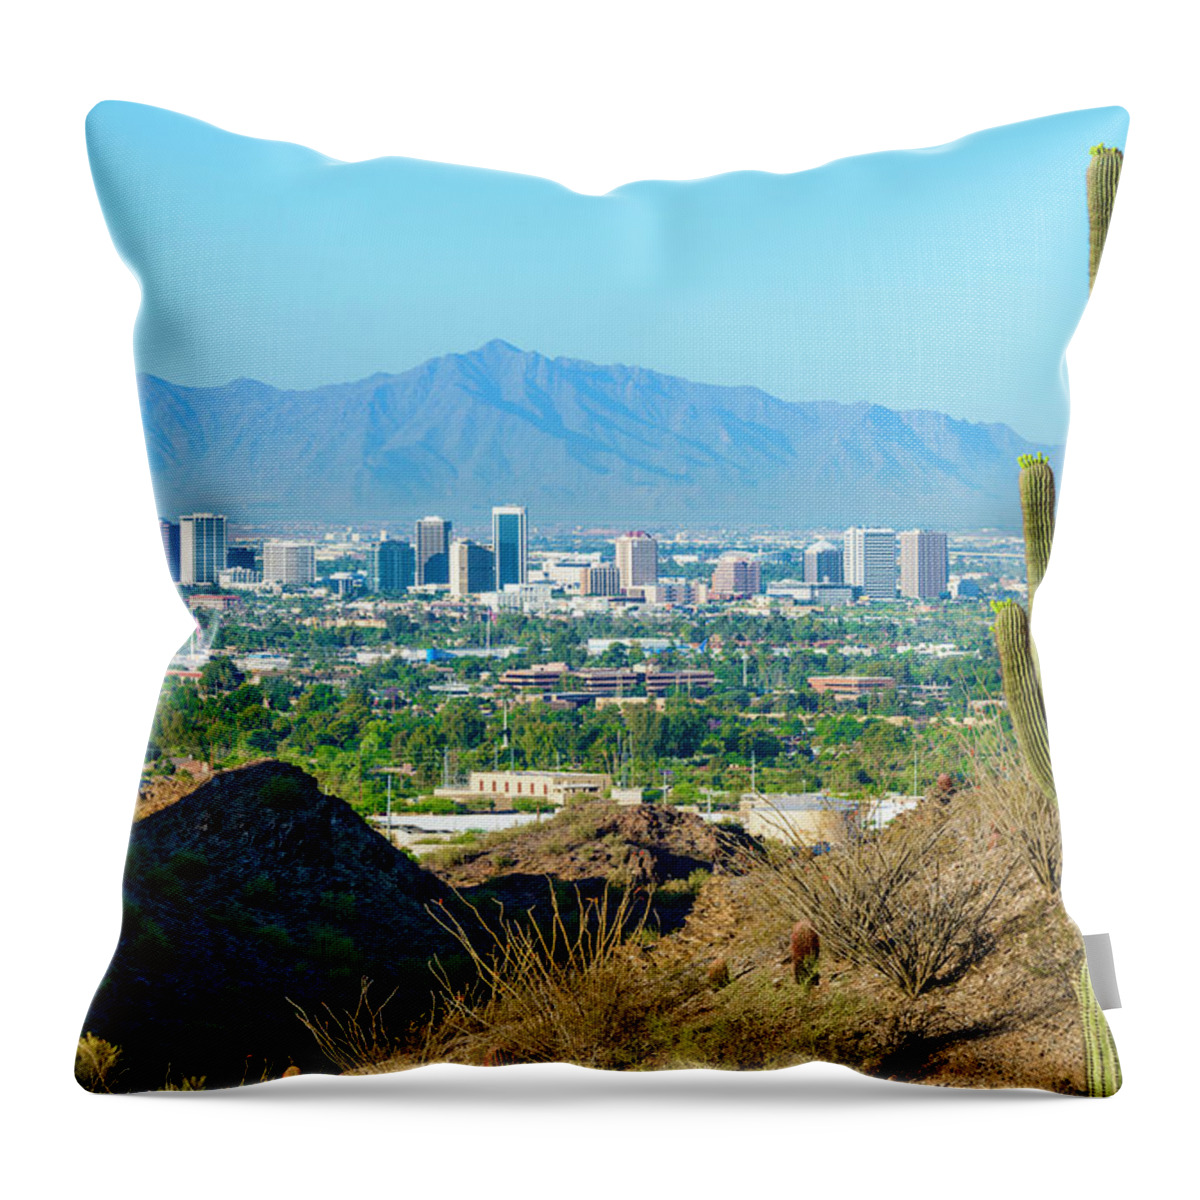 Saguaro Cactus Throw Pillow featuring the photograph Phoenix Skyline Framed By Saguaro by Dszc